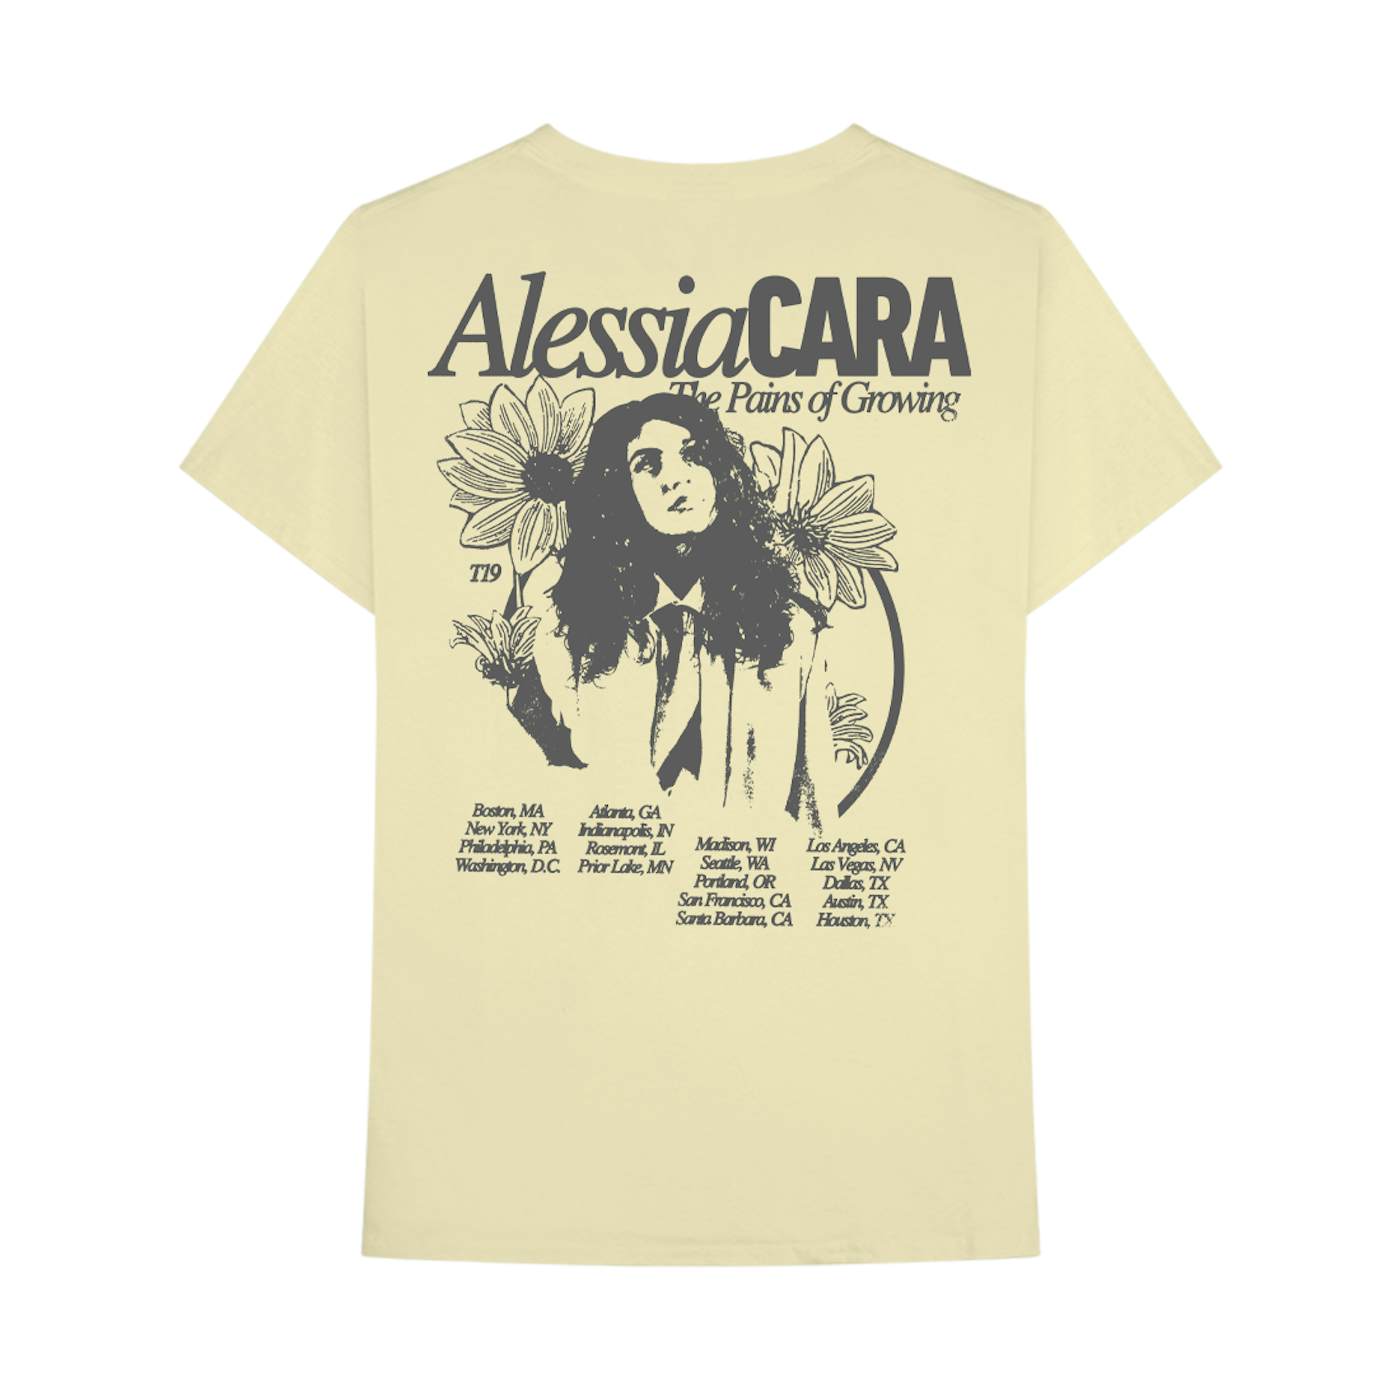 Alessia Cara 'The Pains of Growing Tour' T-Shirt